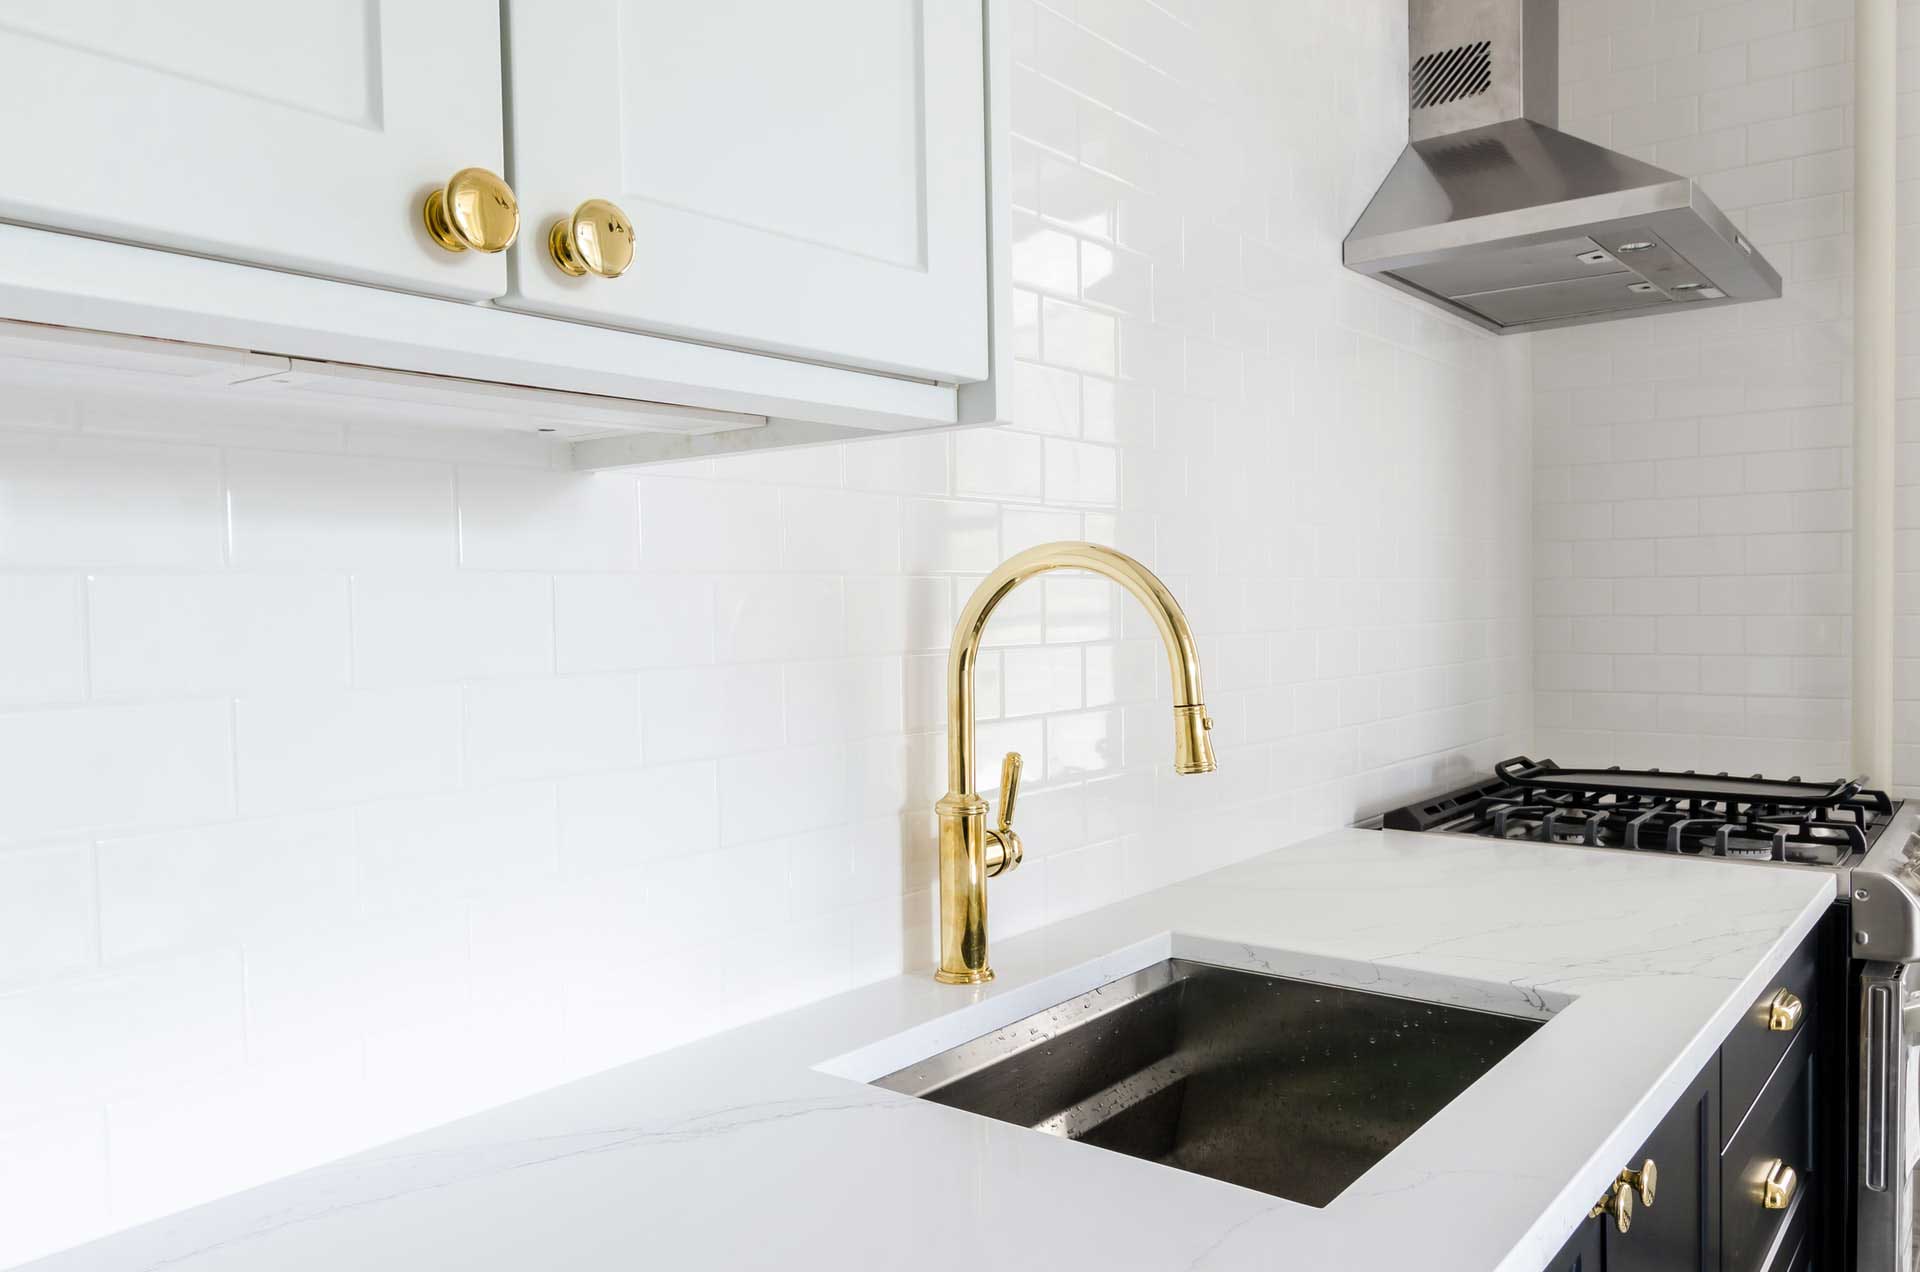 A white marble kitchen countertop with a sink